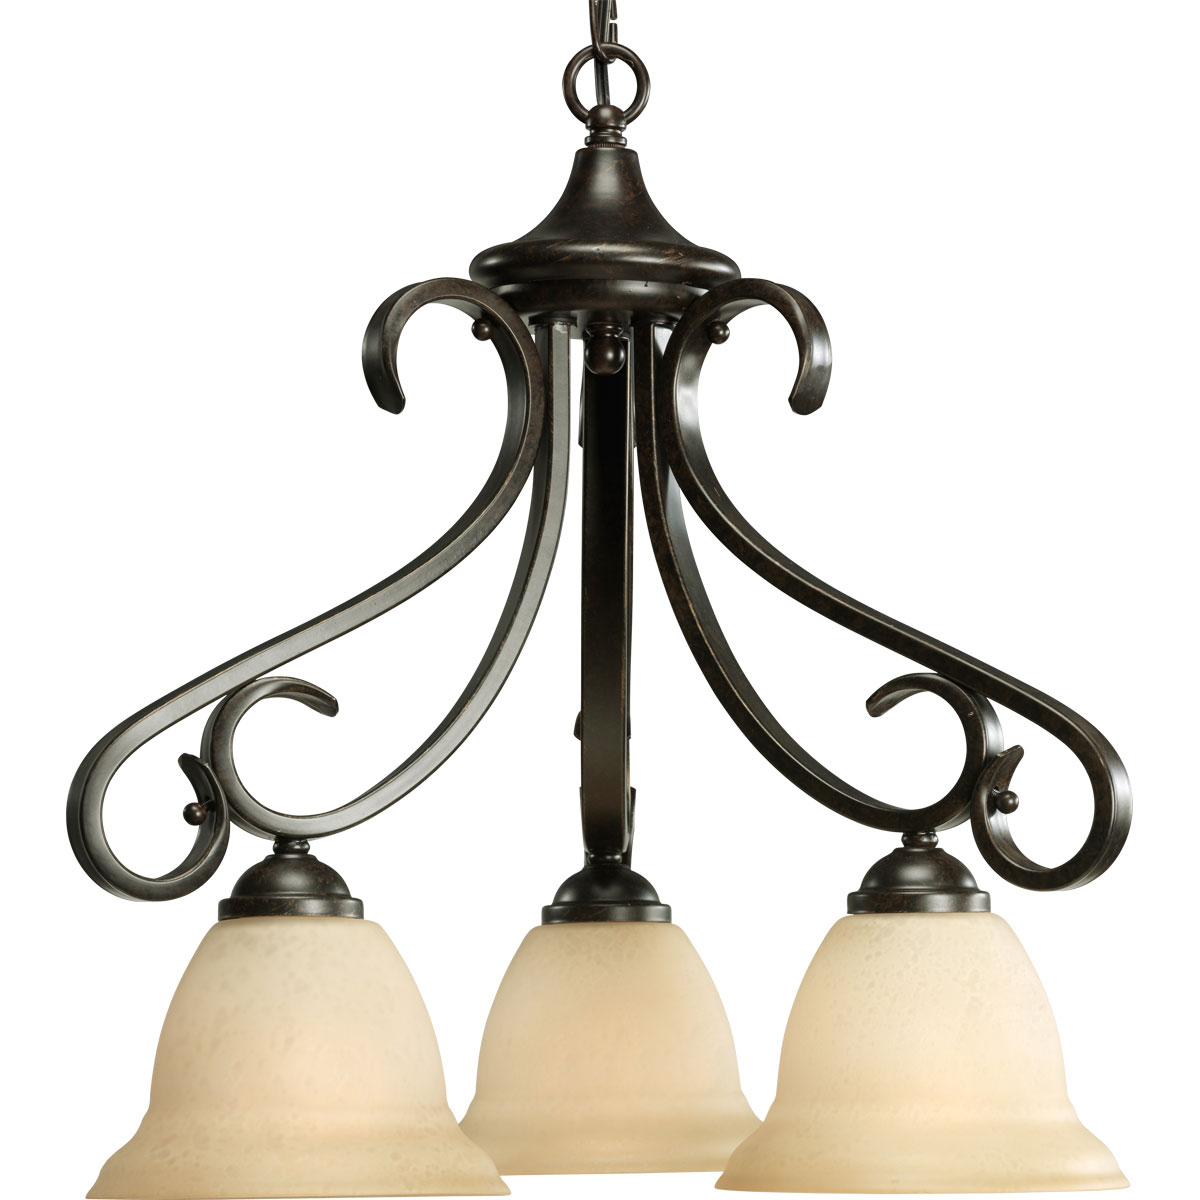 Three-light chandelier with tea stained oversized, bell-shaped glass bowls. Distinctive ebbing and flowing of squared scrolls and arms in Forged Bronze finish.